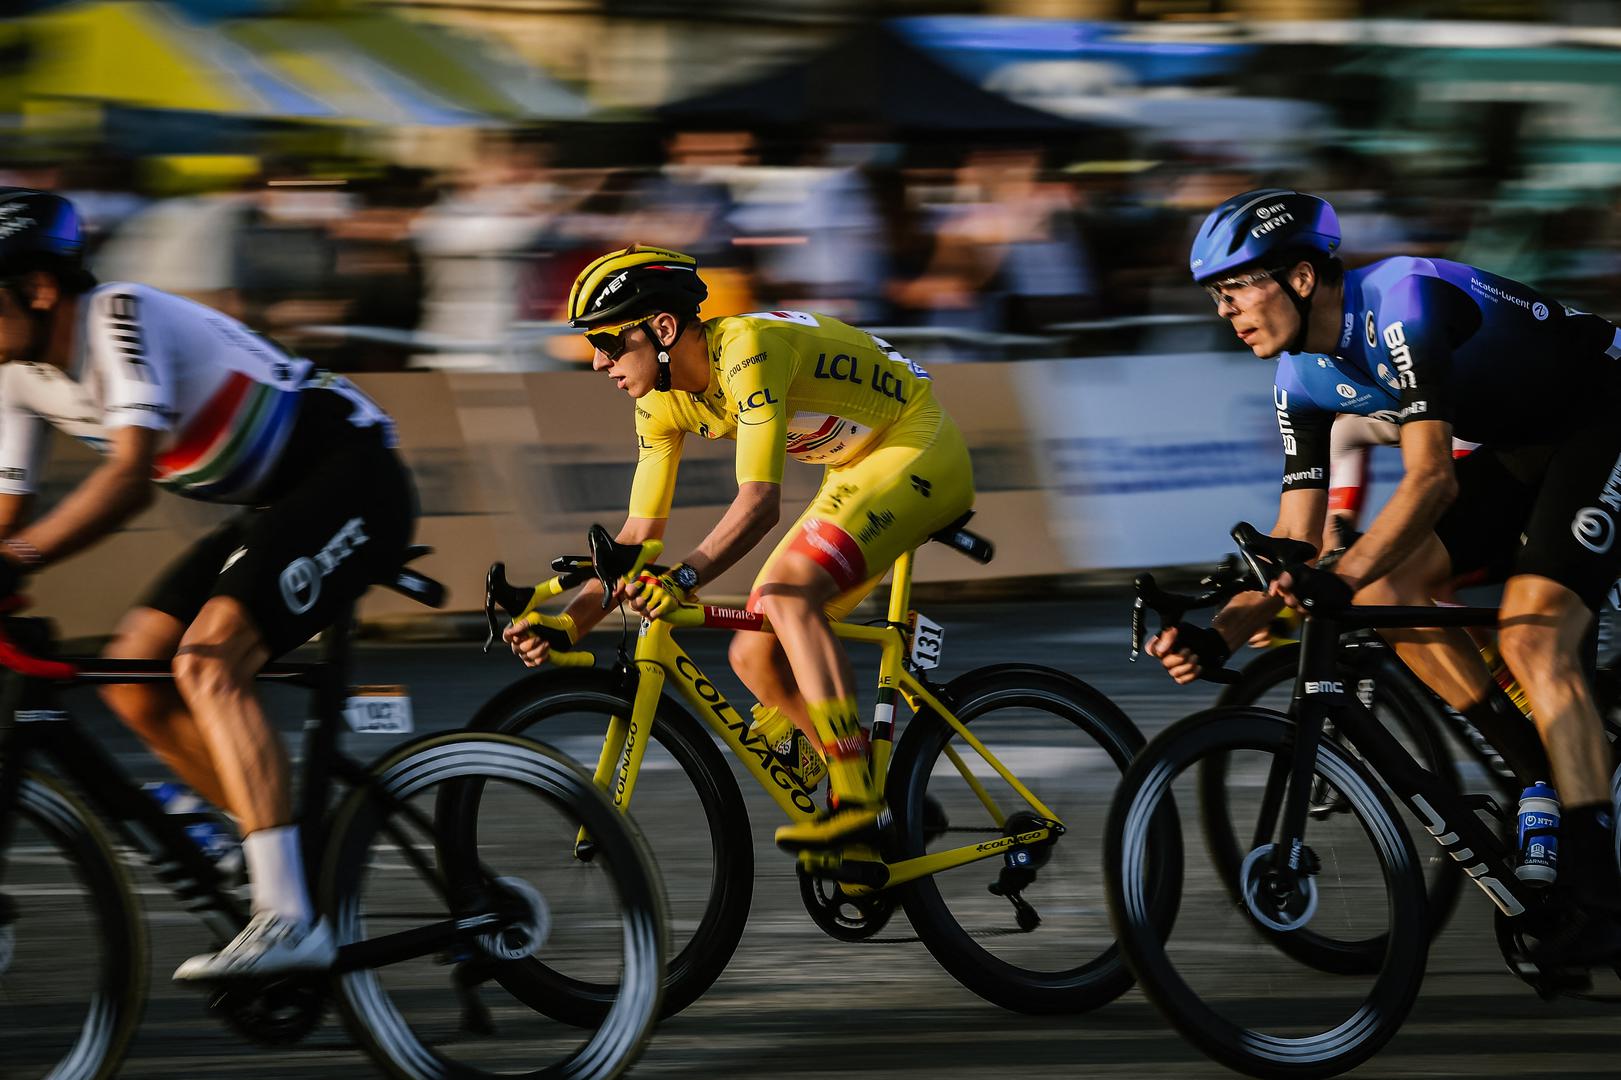 Tadej Pogacar wins Tour de France 2020 Handout. Final stage of the 107th edition of the Tour de France cycling race, 122km from Mantes-la-Jolie to Paris, in France, Sunday 20 September 2020. This year's Tour de France was postponed due to the worldwide Covid-19 pandemic. The 2020 race starts in Nice on Saturday 29 August and ends on 20 September. Photo by Pauline Ballet/ASO via ABACAPRESS.COM ABACA /PIXSELL